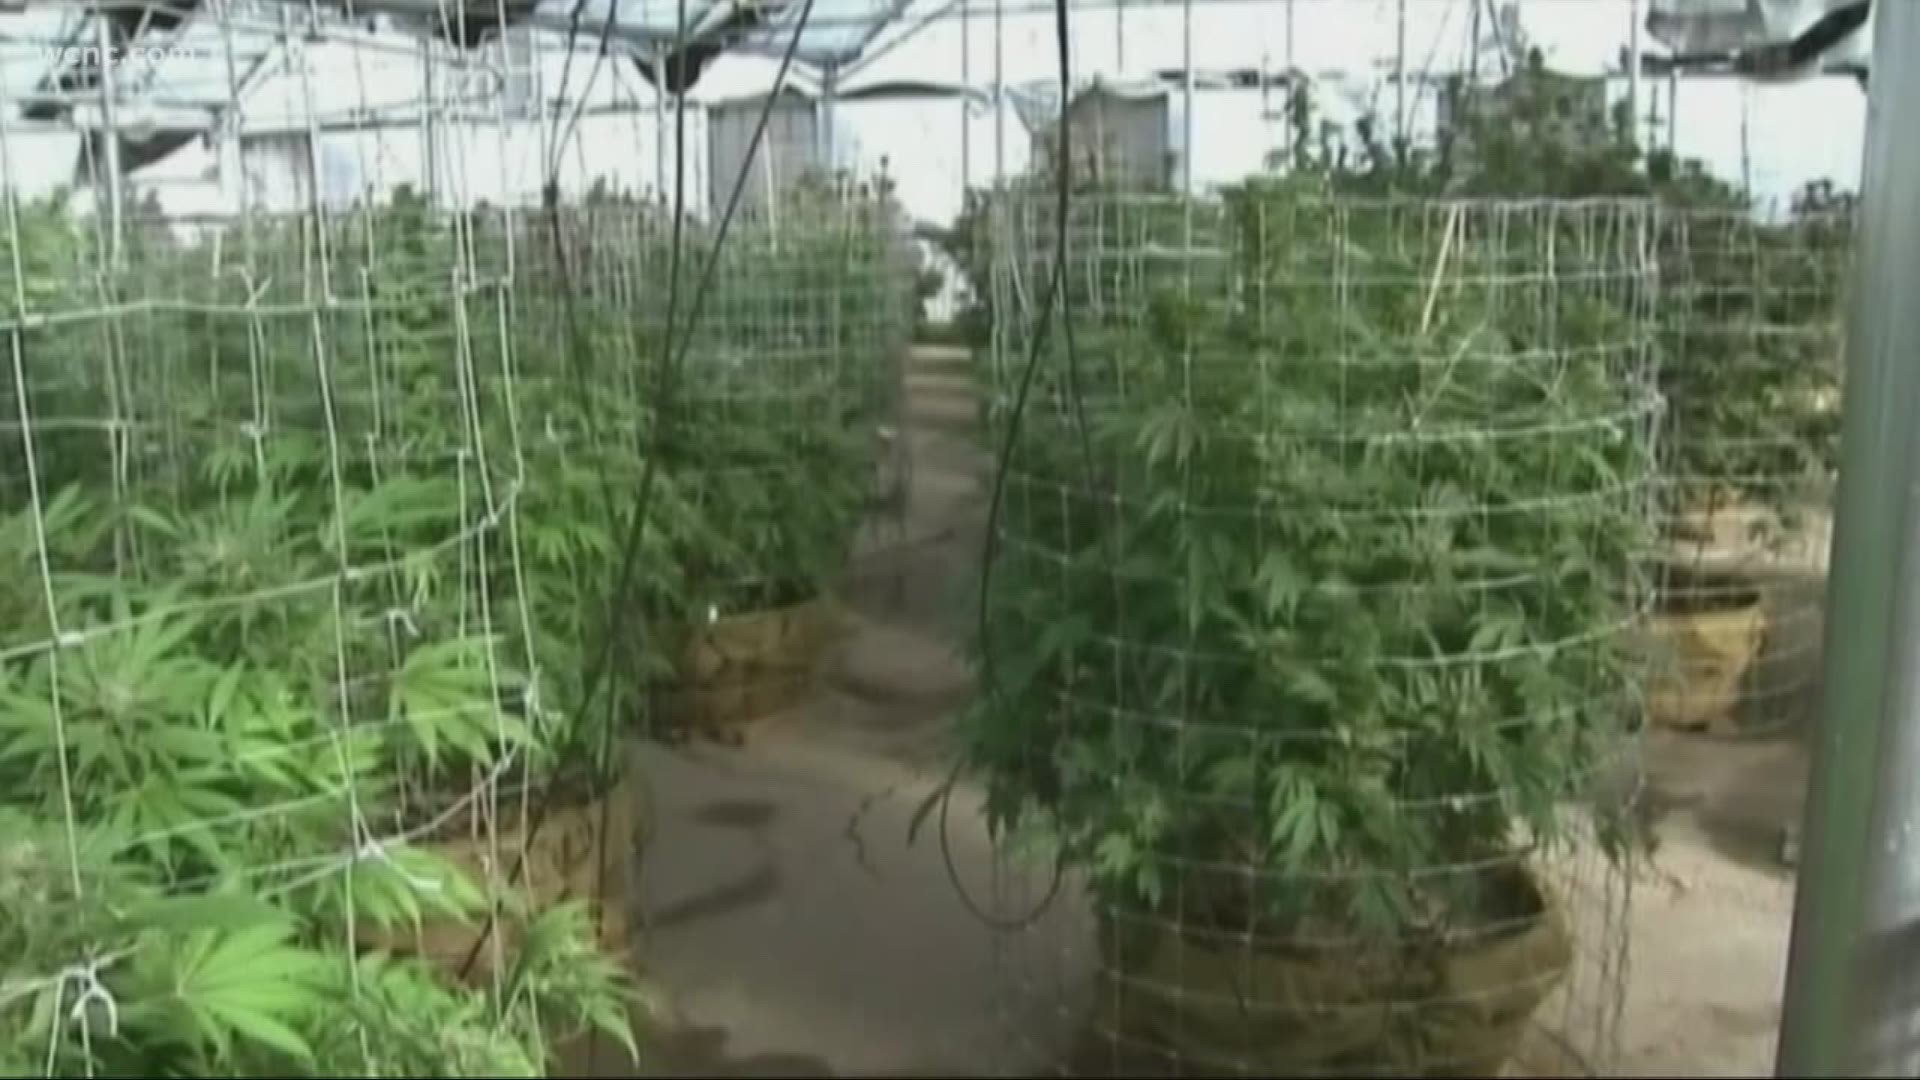 The NC state legislature could debate whether to make medical marijuana legal in NC as they start their final session of the year.